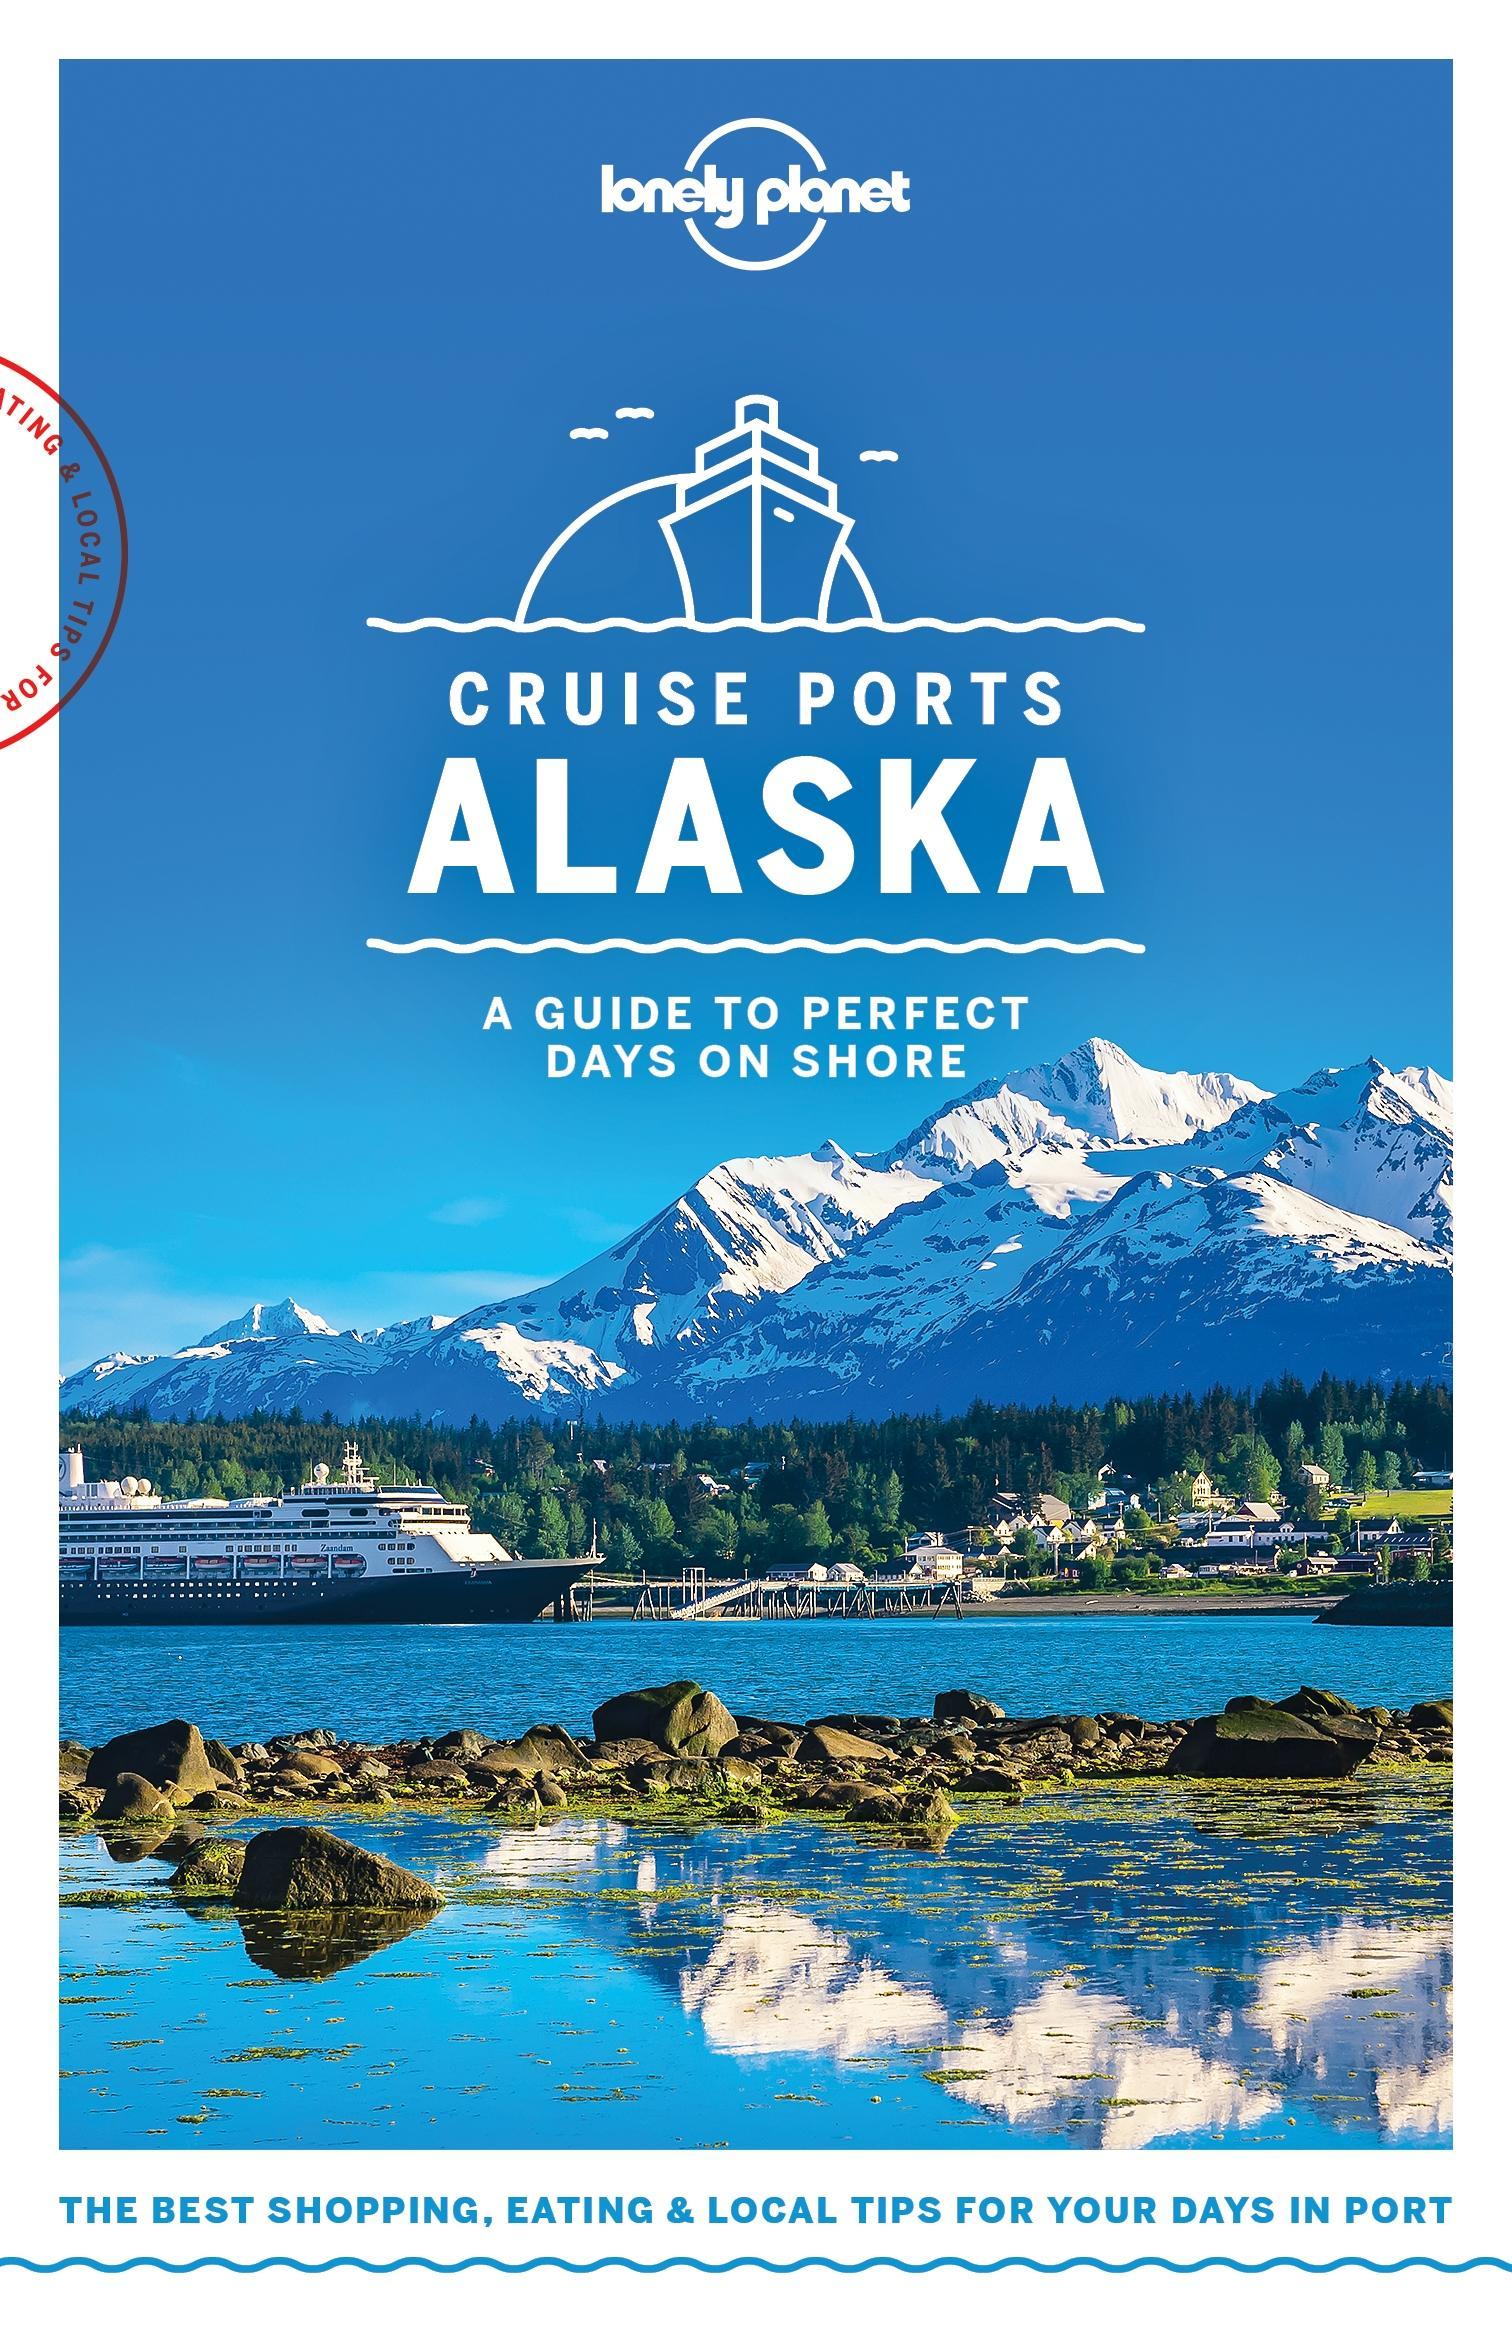 Planet　Lonely　Planet　Guide　Lonely　Cruise　Lonely　Travel　v.　Planet　eBook　Alaska　Ports　Weltbild